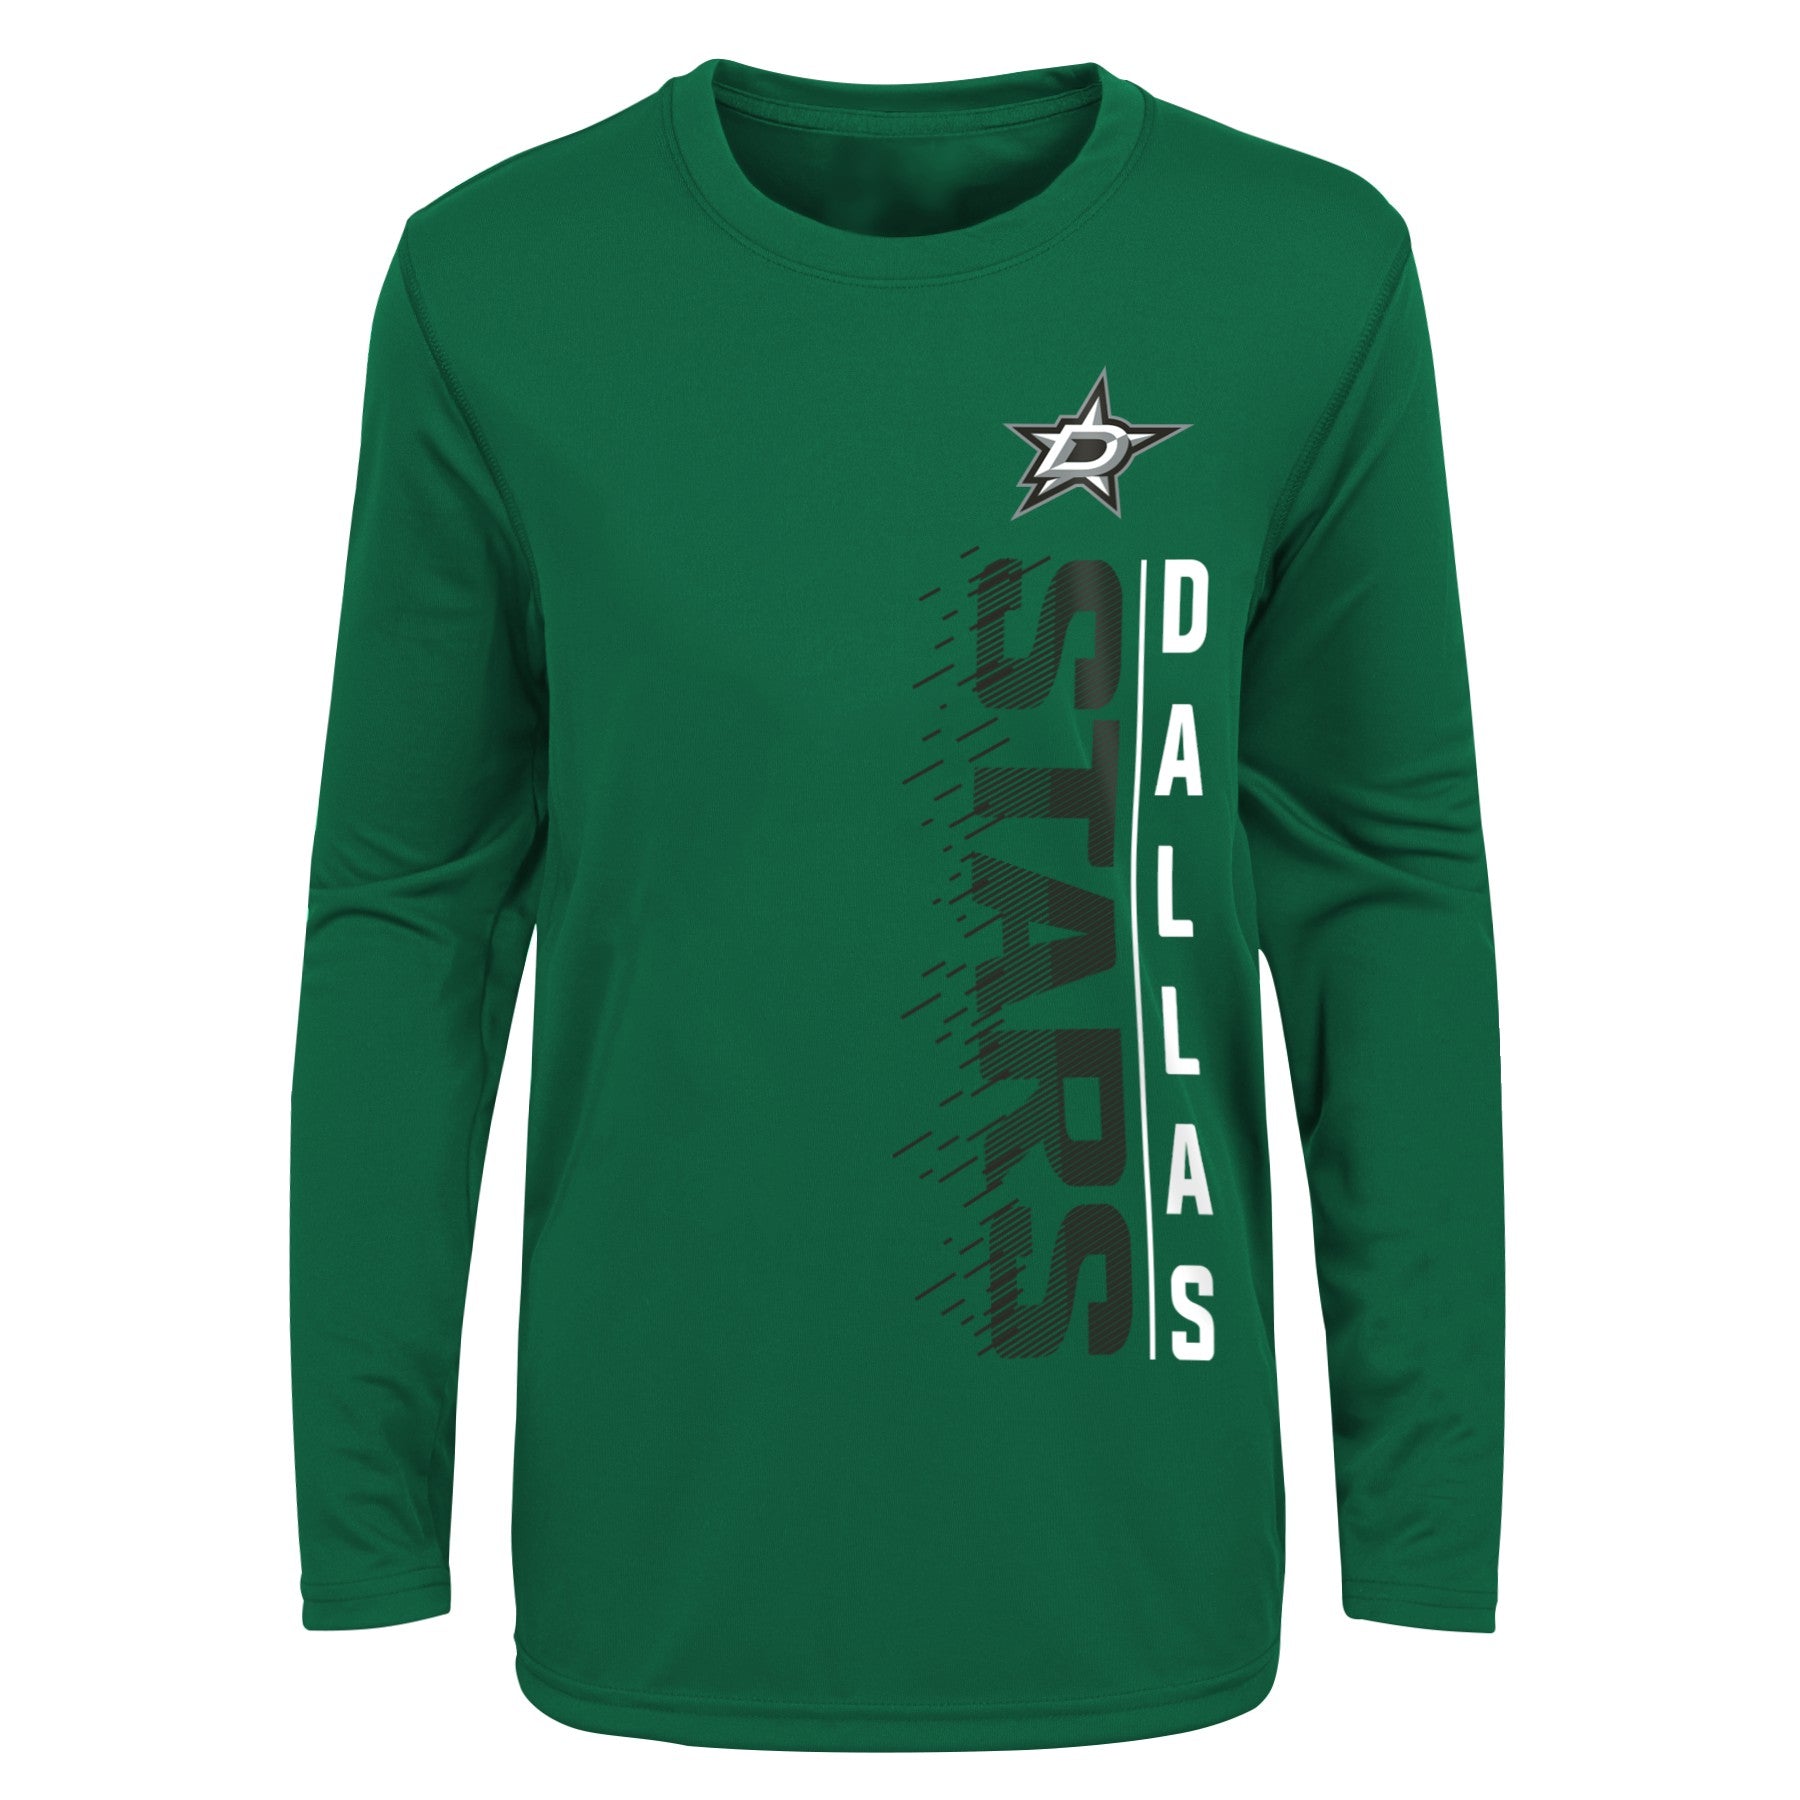 Outerstuff NHL Youth Boys (8-20) Dallas Stars Performance T-Shirt